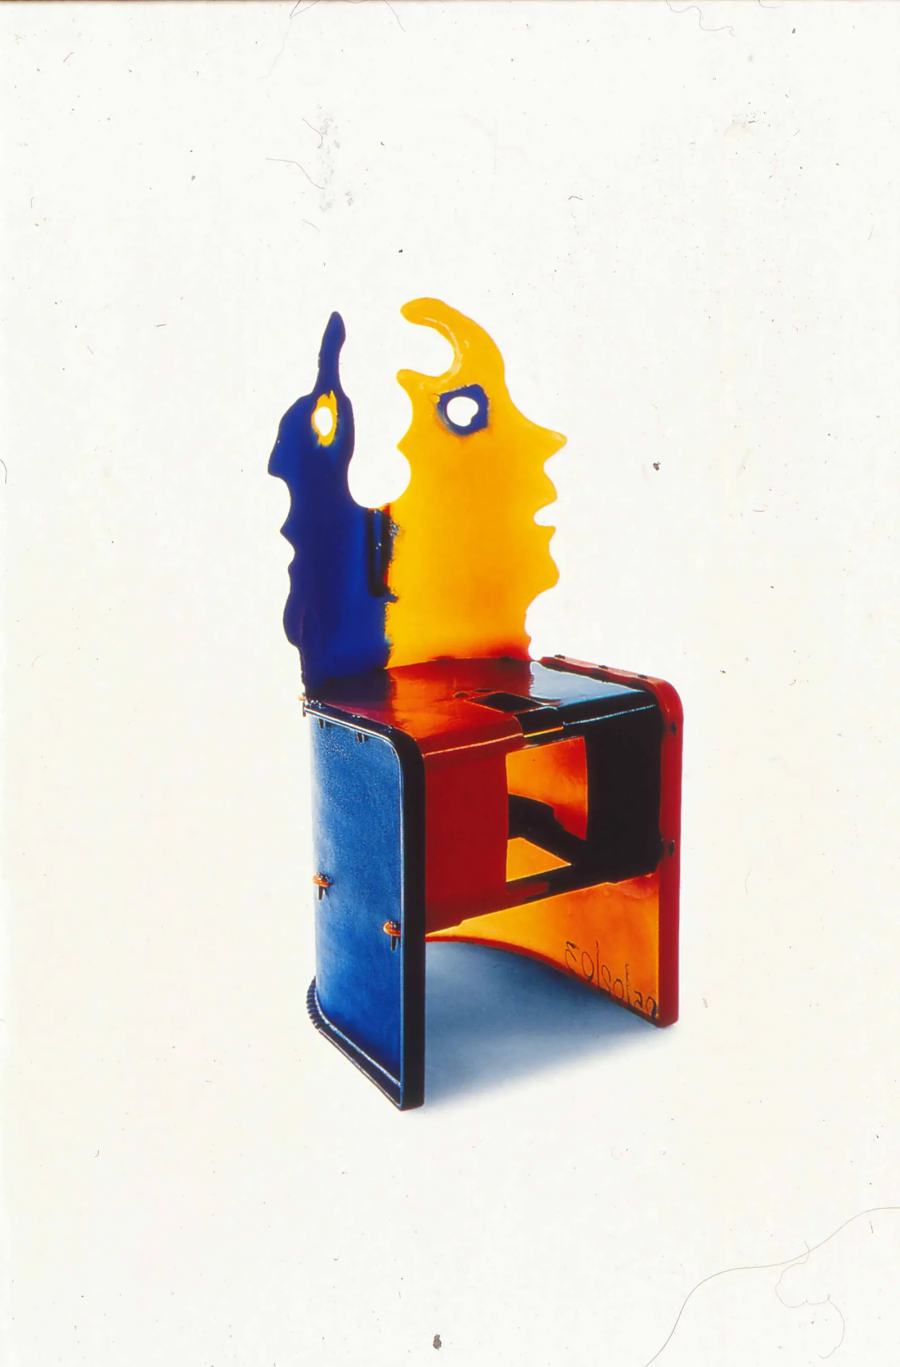 Nobody's perfect Chair, 2002